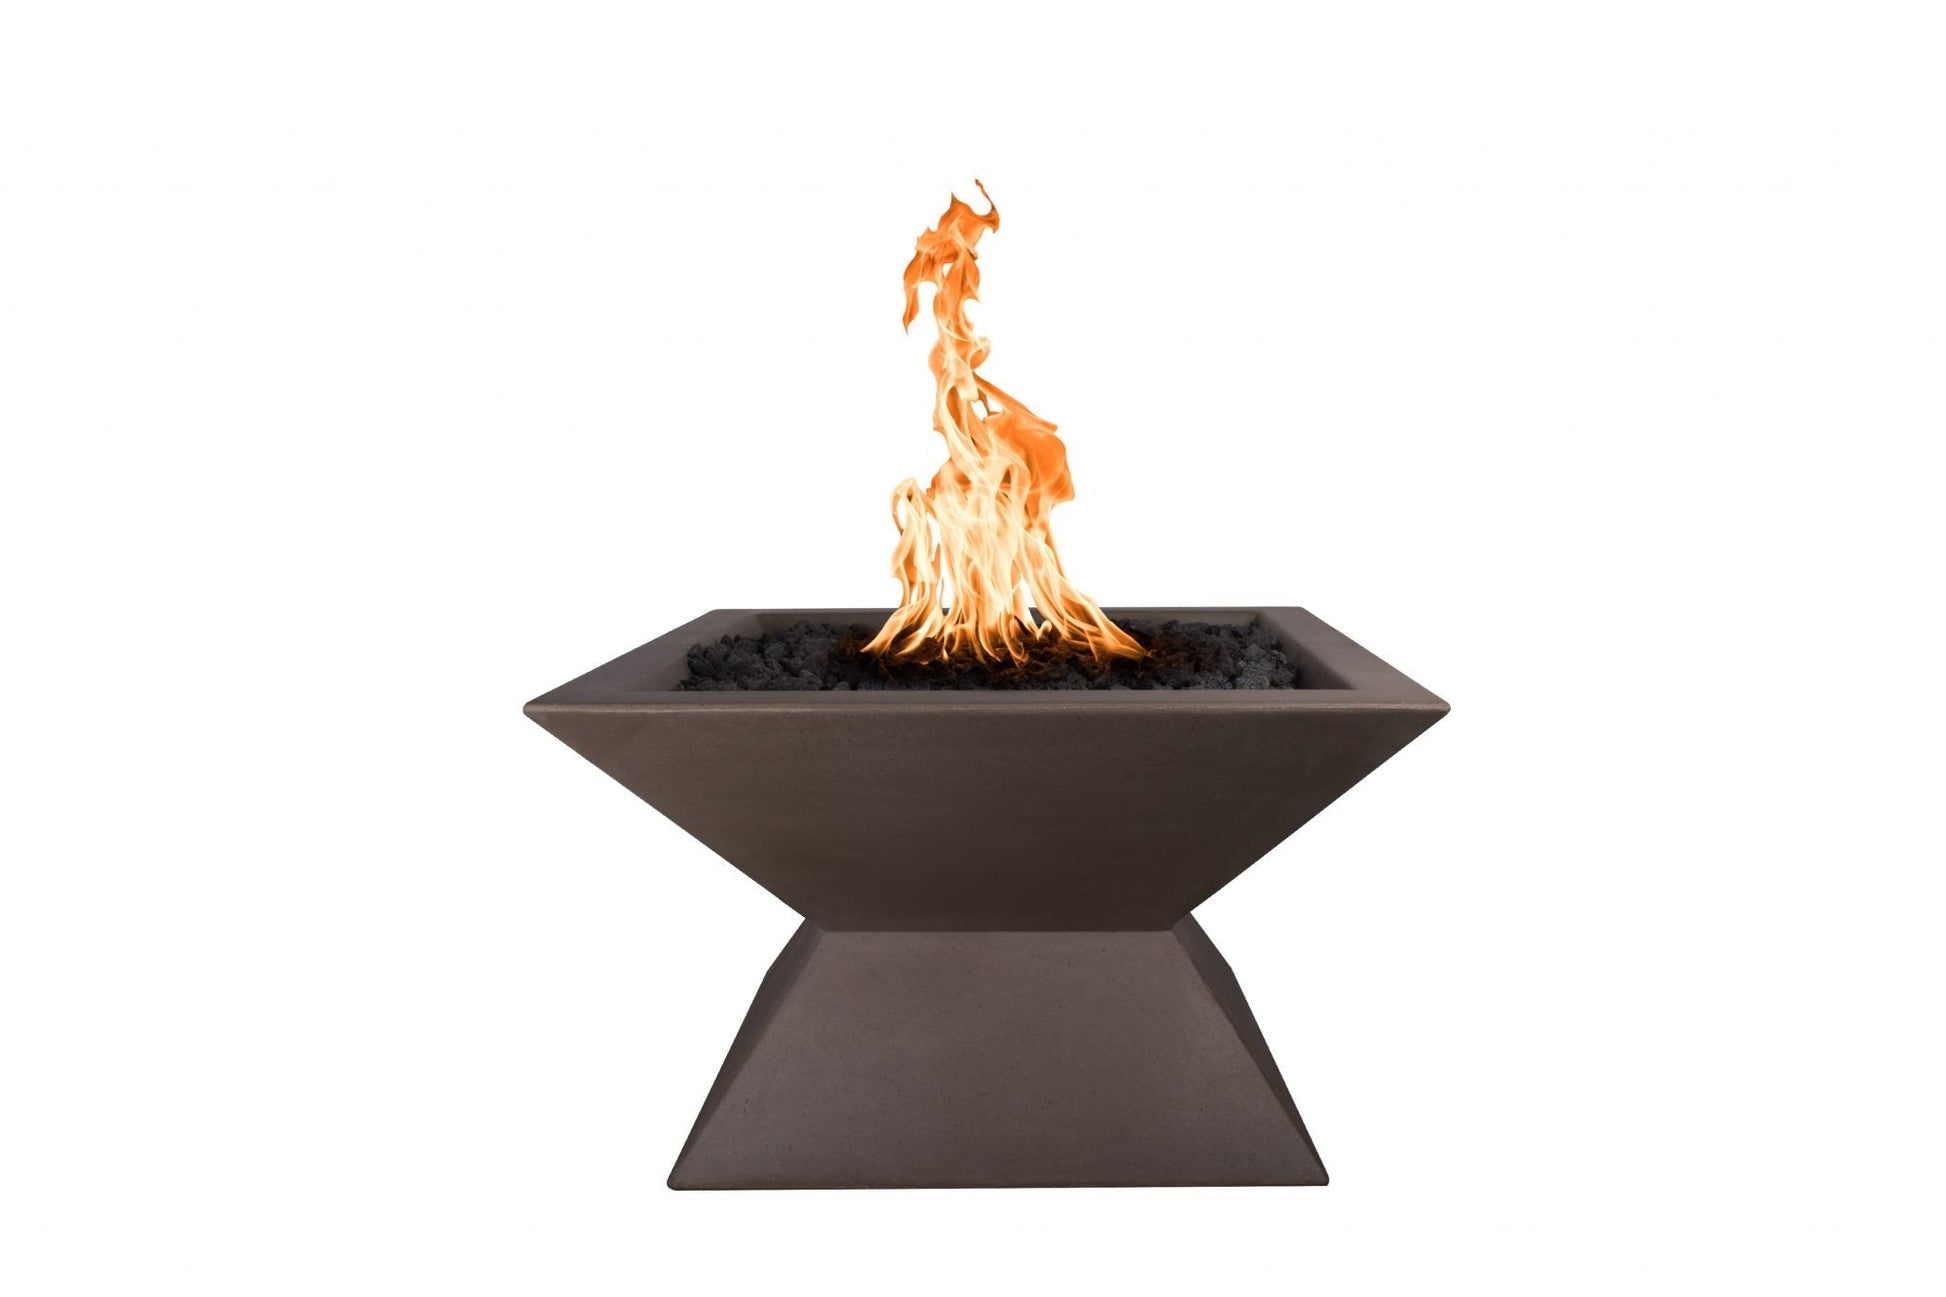 The Outdoor Plus Square Uxmal 30" Vanilla GFRC Concrete Liquid Propane Fire Pit with Match Lit with Flame Sense Ignition